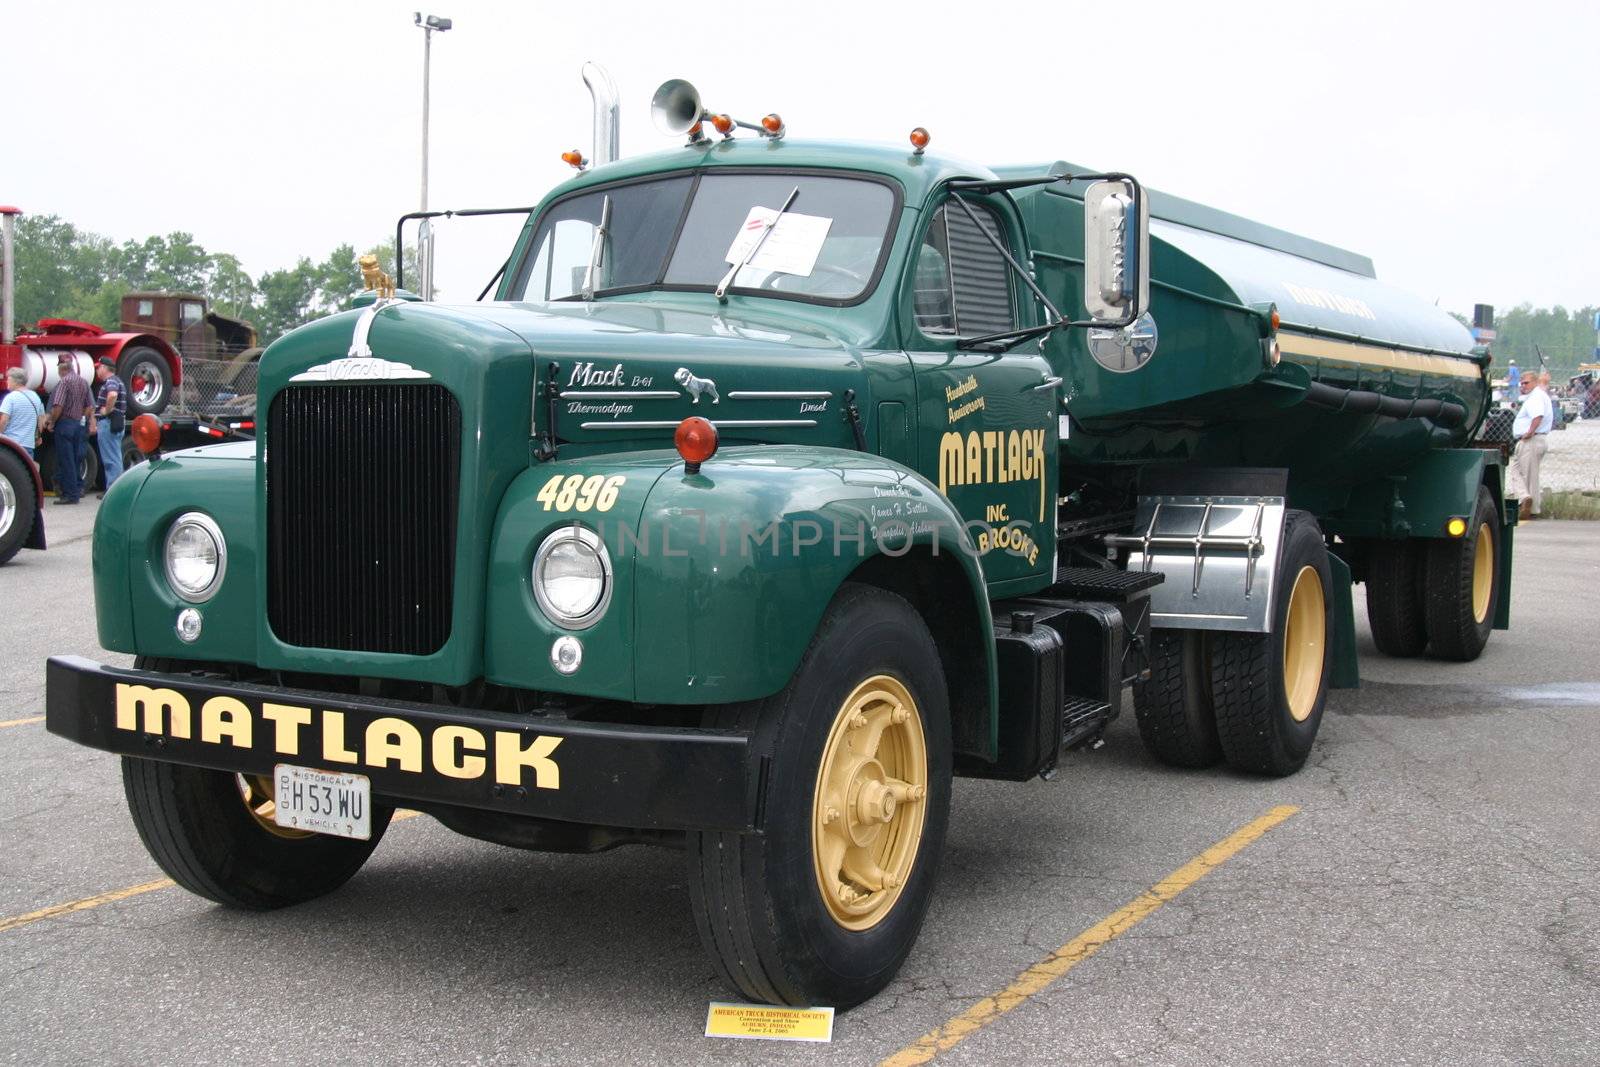 This is a dark green front view of a Matlack fuel tanker truck and trailer.